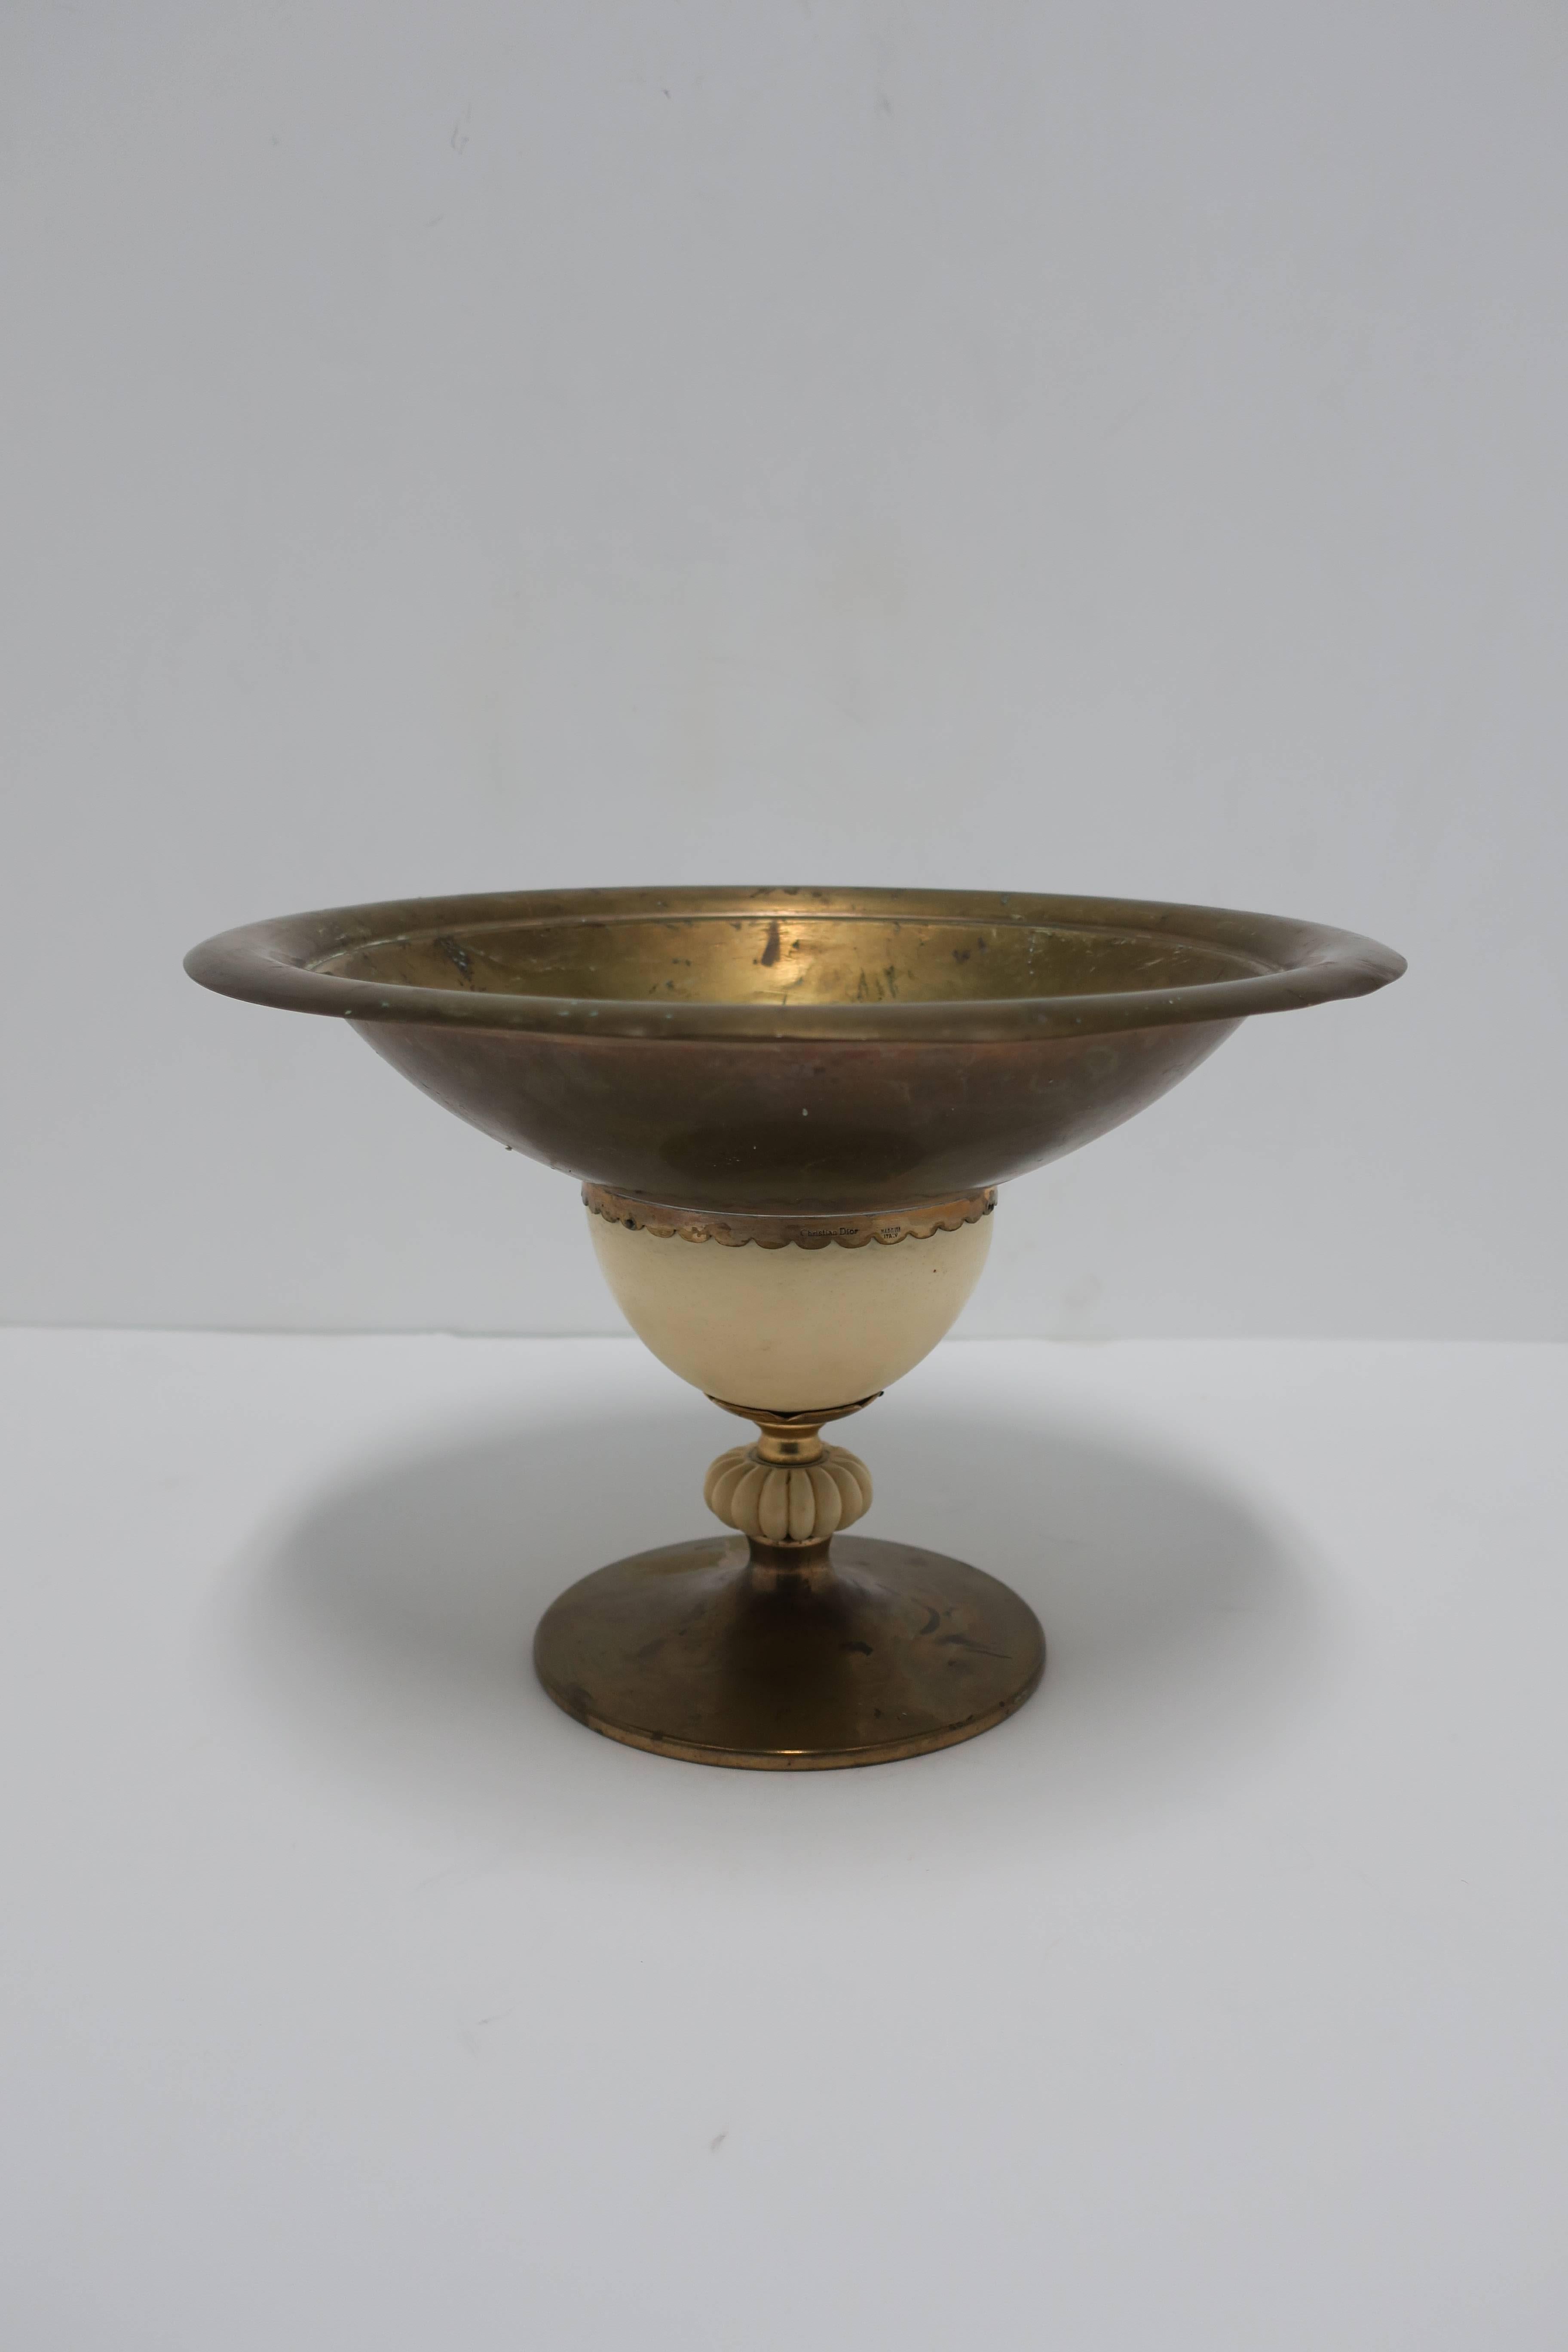 A beautiful designer vintage Italian brass and ostrich egg compote, centerpiece, tazza, or footed bowl by Christian Dior, Made in Italy. Piece is marked: 'Christian Dior', 'Italy', on scalloped brass edge on side as show in image #10. 

Piece